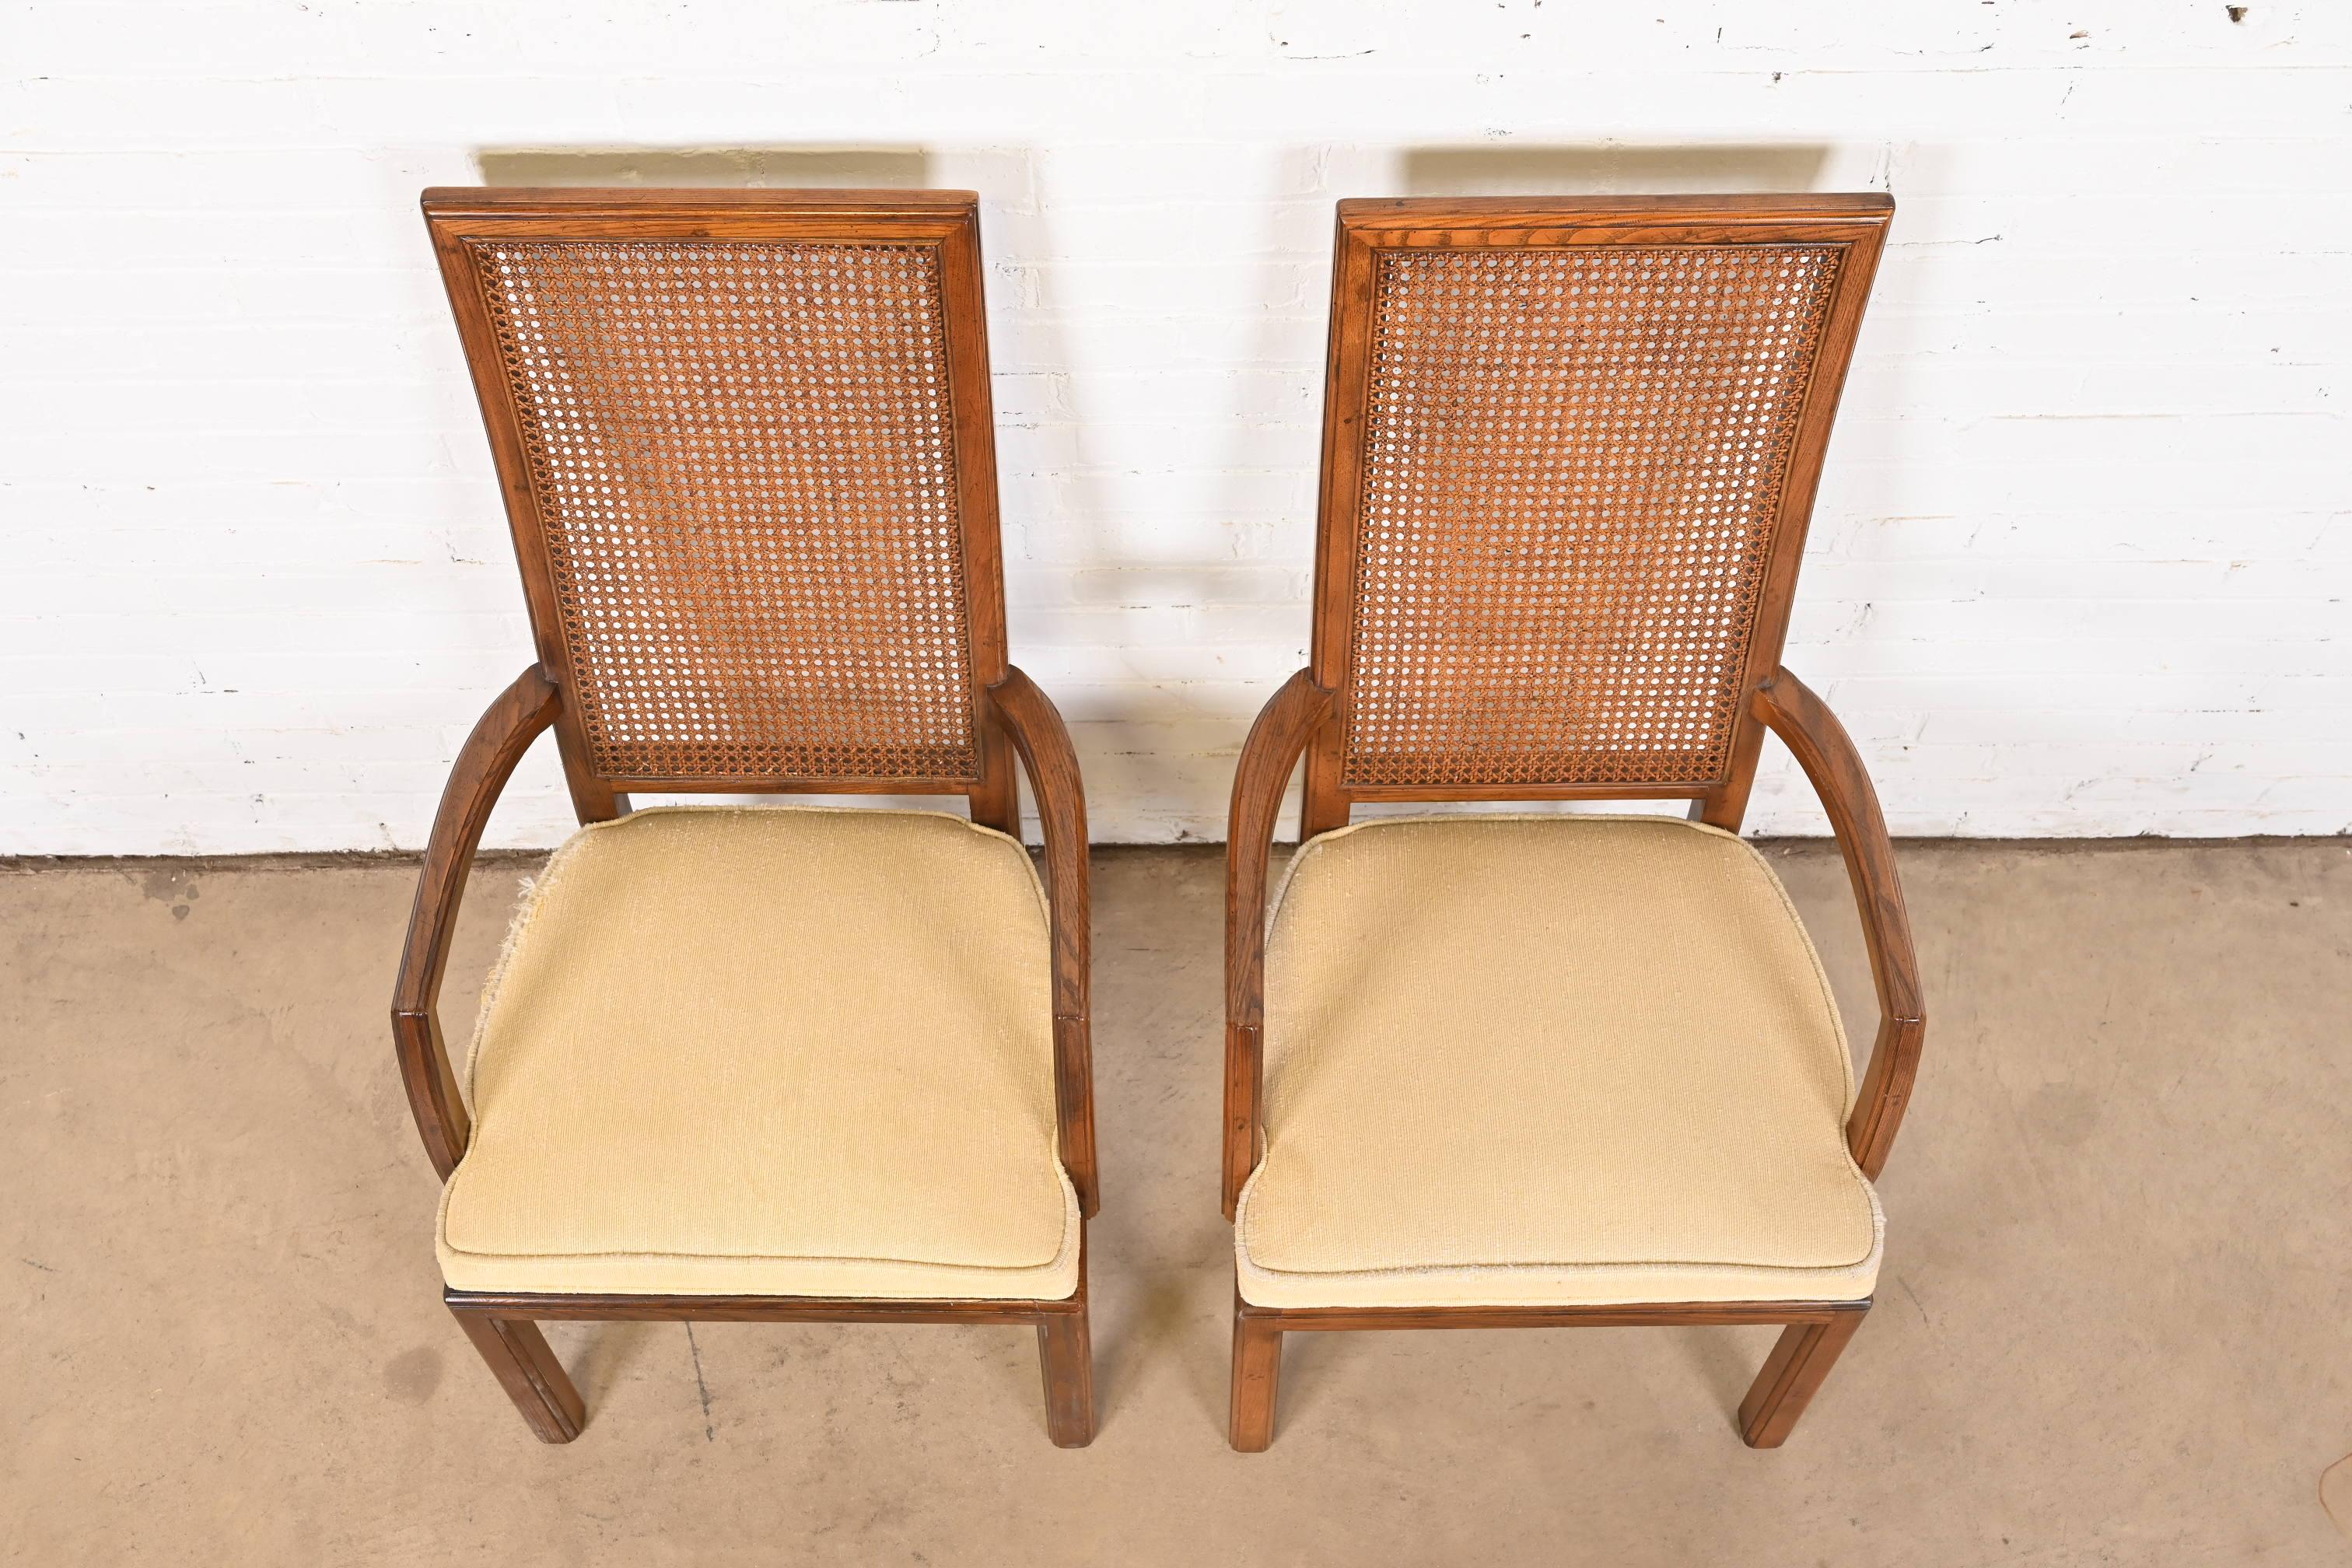 Henredon Mid-Century Modern Oak and Cane High Back Dining Arm Chairs, Pair For Sale 2